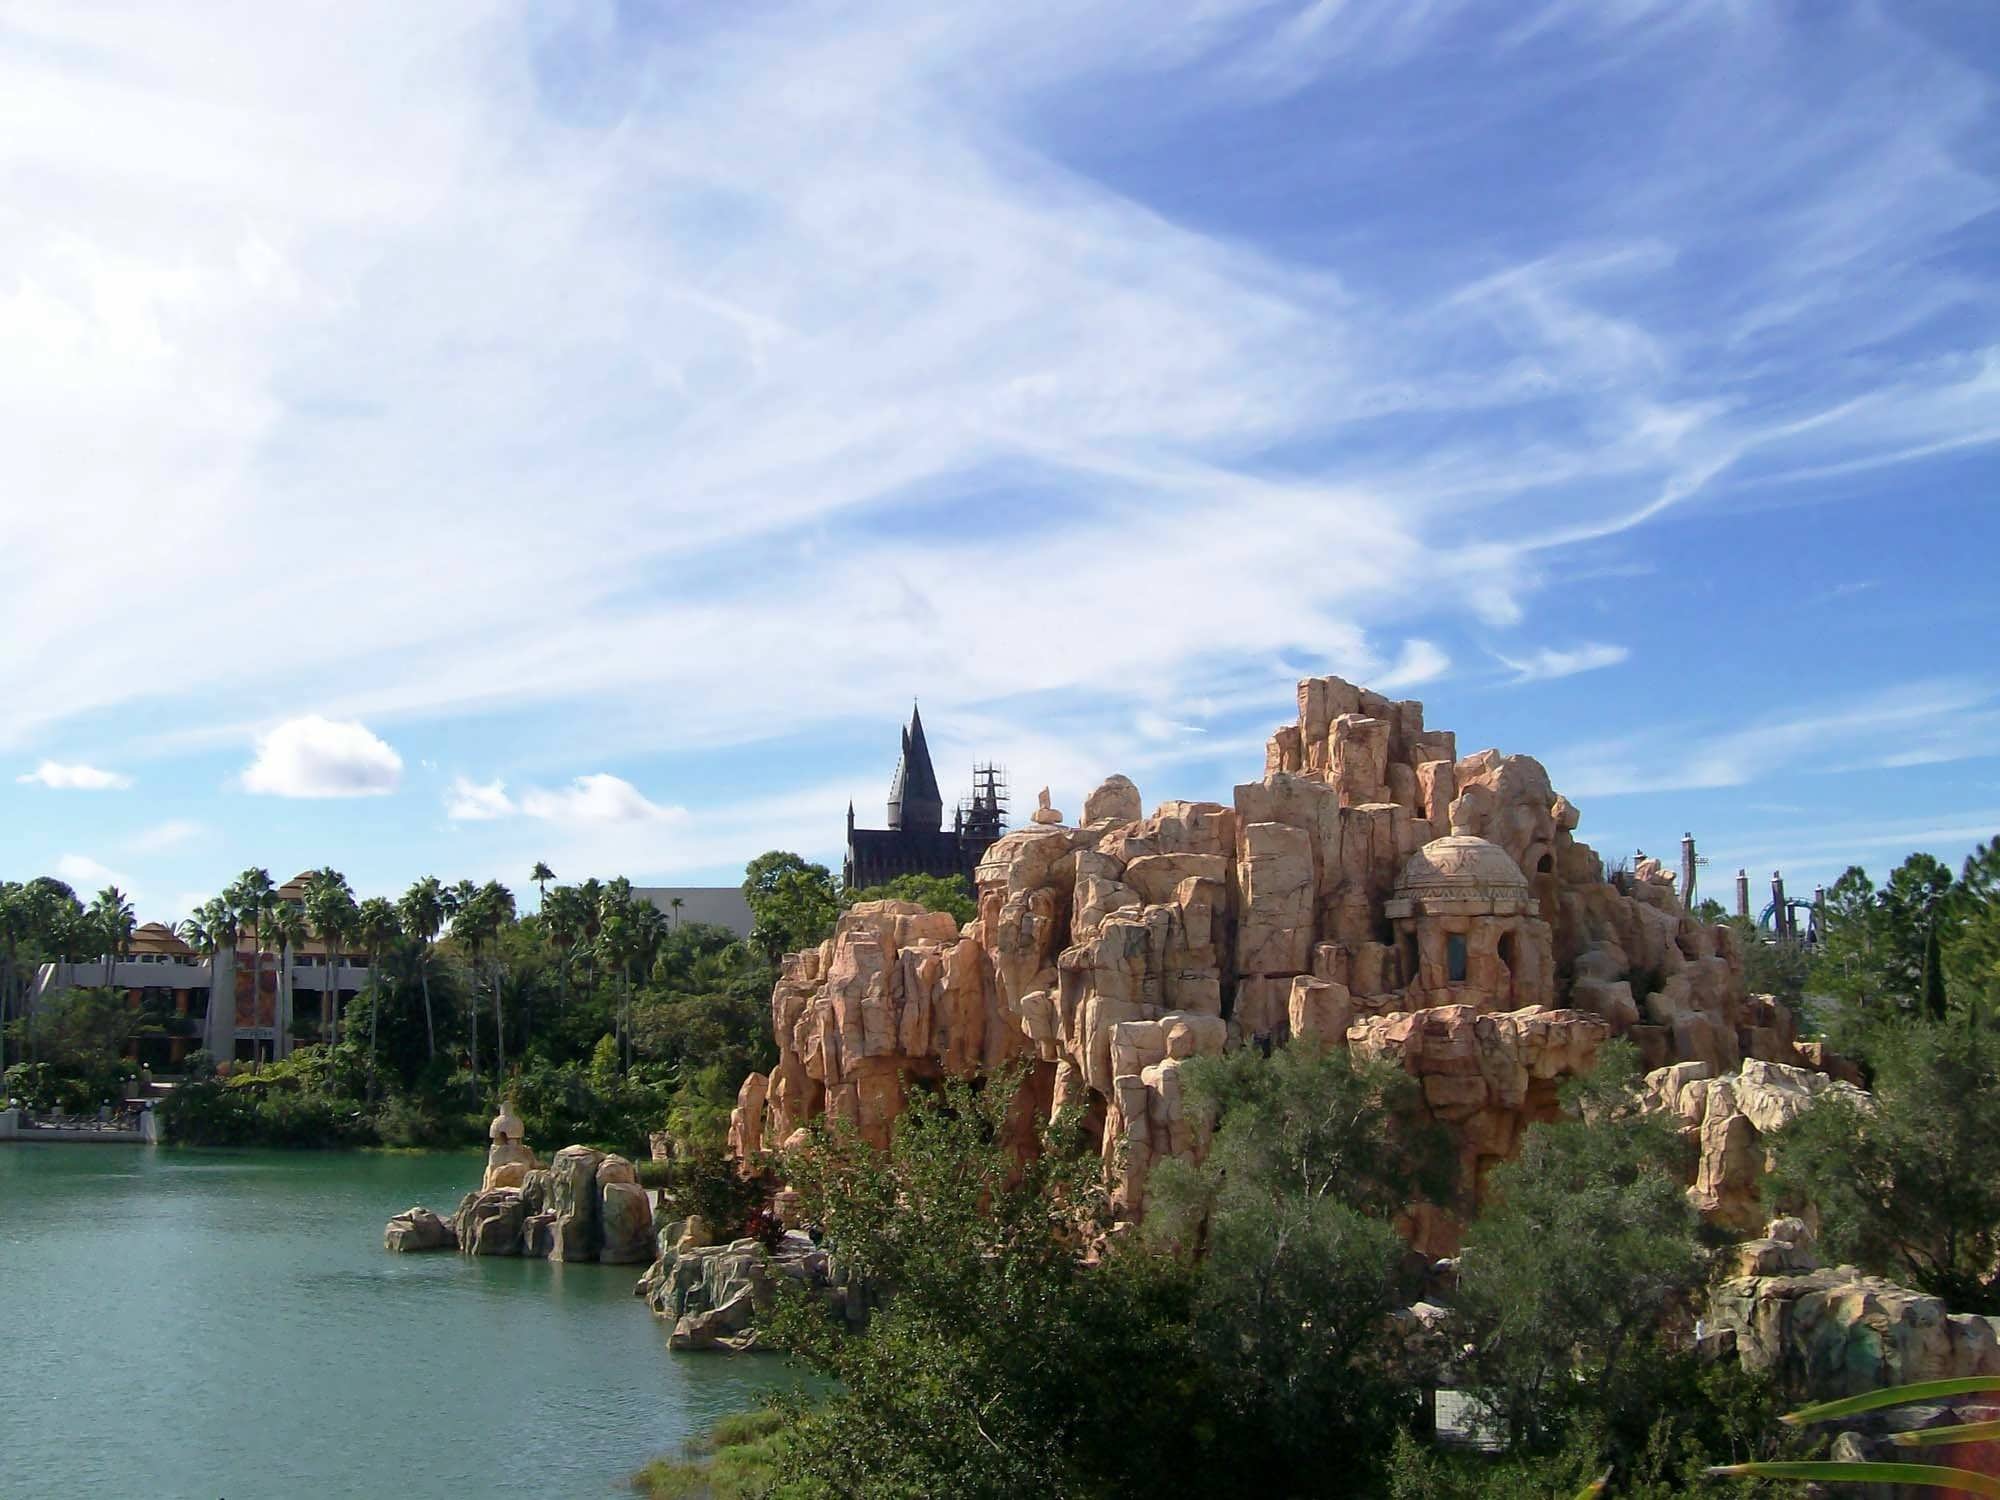 Islands of Adventure's 20th Anniversary — Looking at Our Reader's